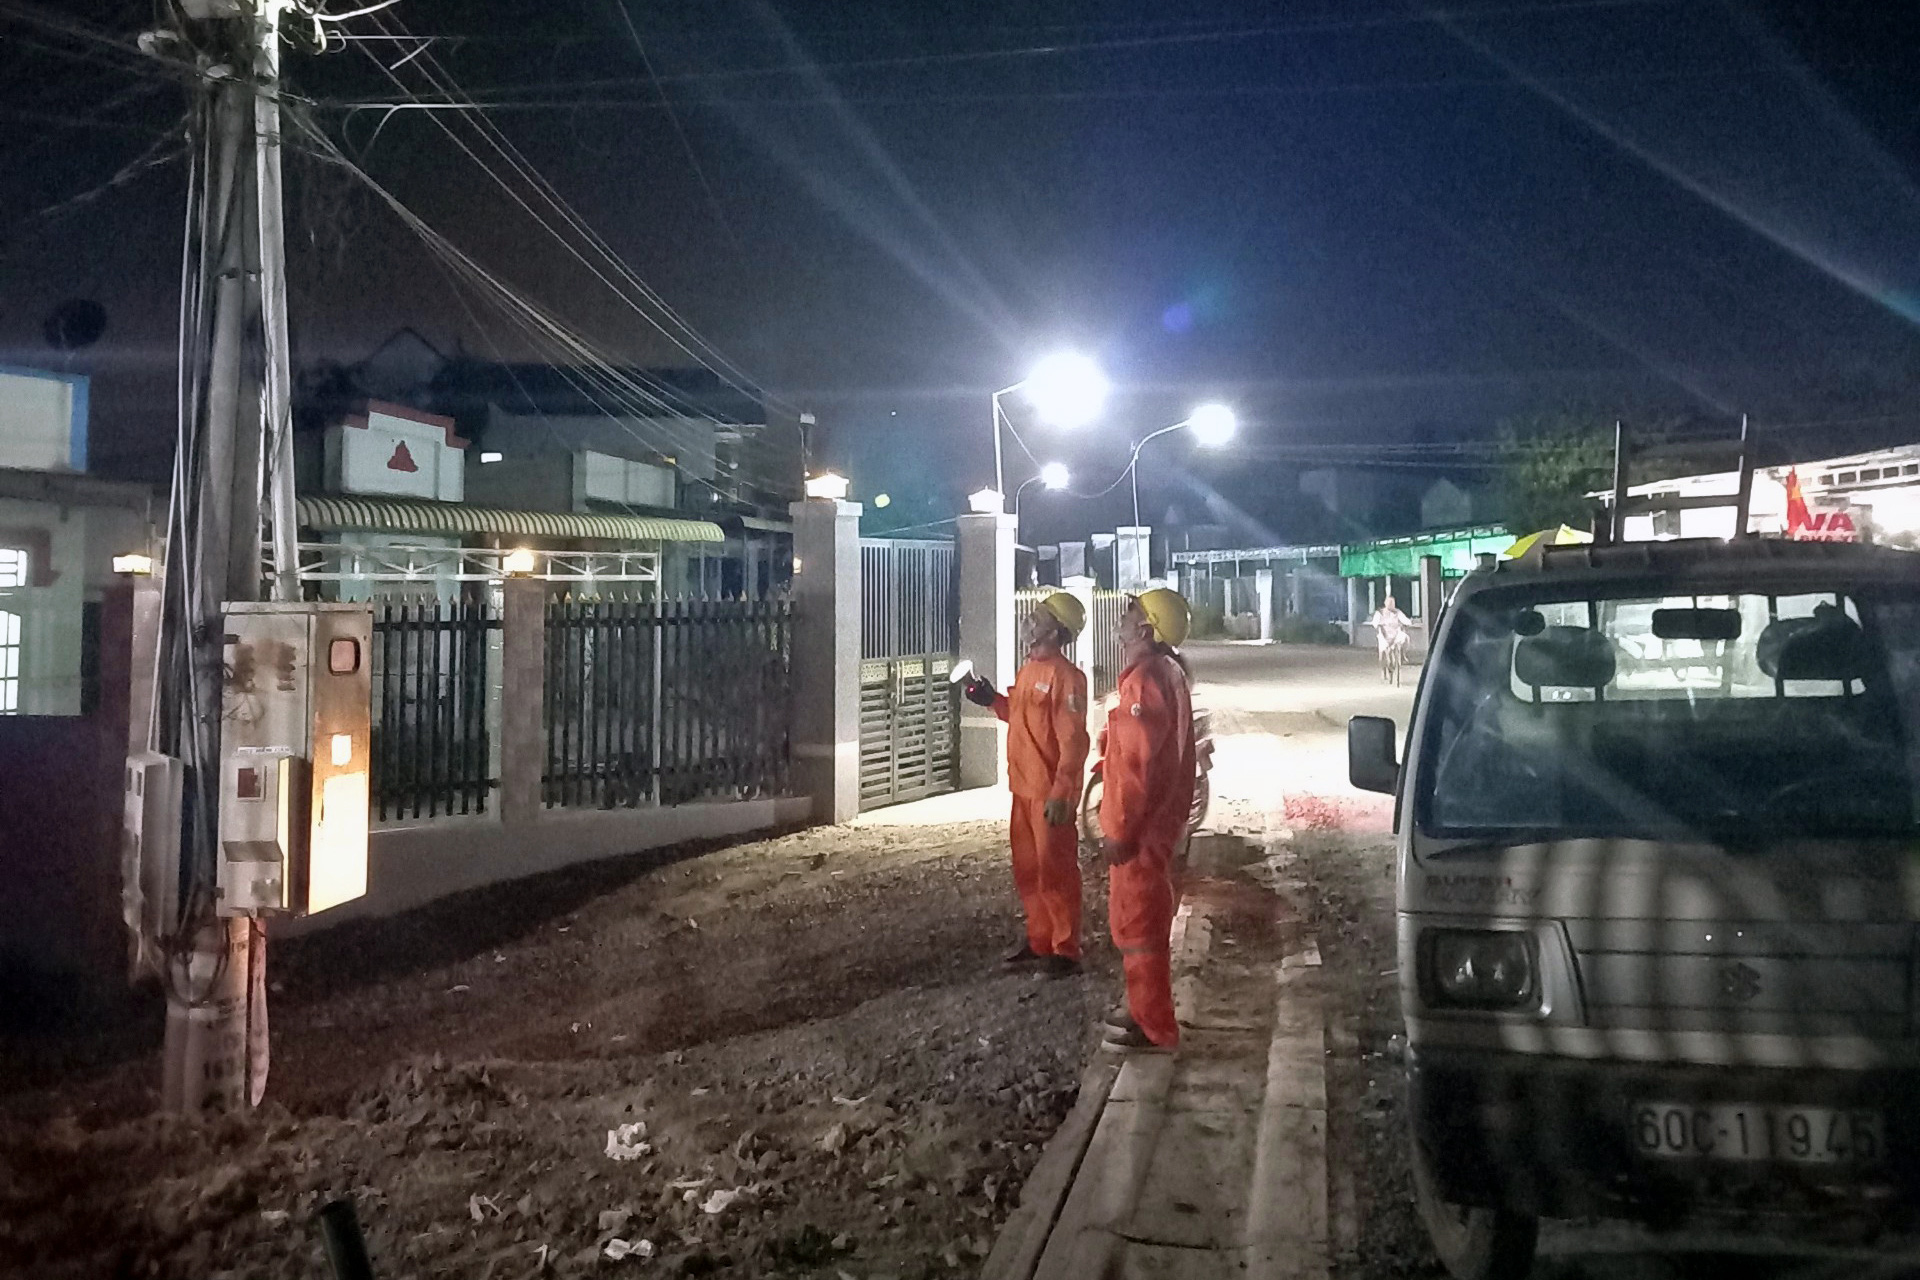 Electricity returns to more than 70 households after a day-long outage due to an incident caused by the ground-leveling process of the Long Thanh International Airport project in Long Thanh District, Dong Nai Province, Vietnam. Photo: H.M. / Tuoi Tre